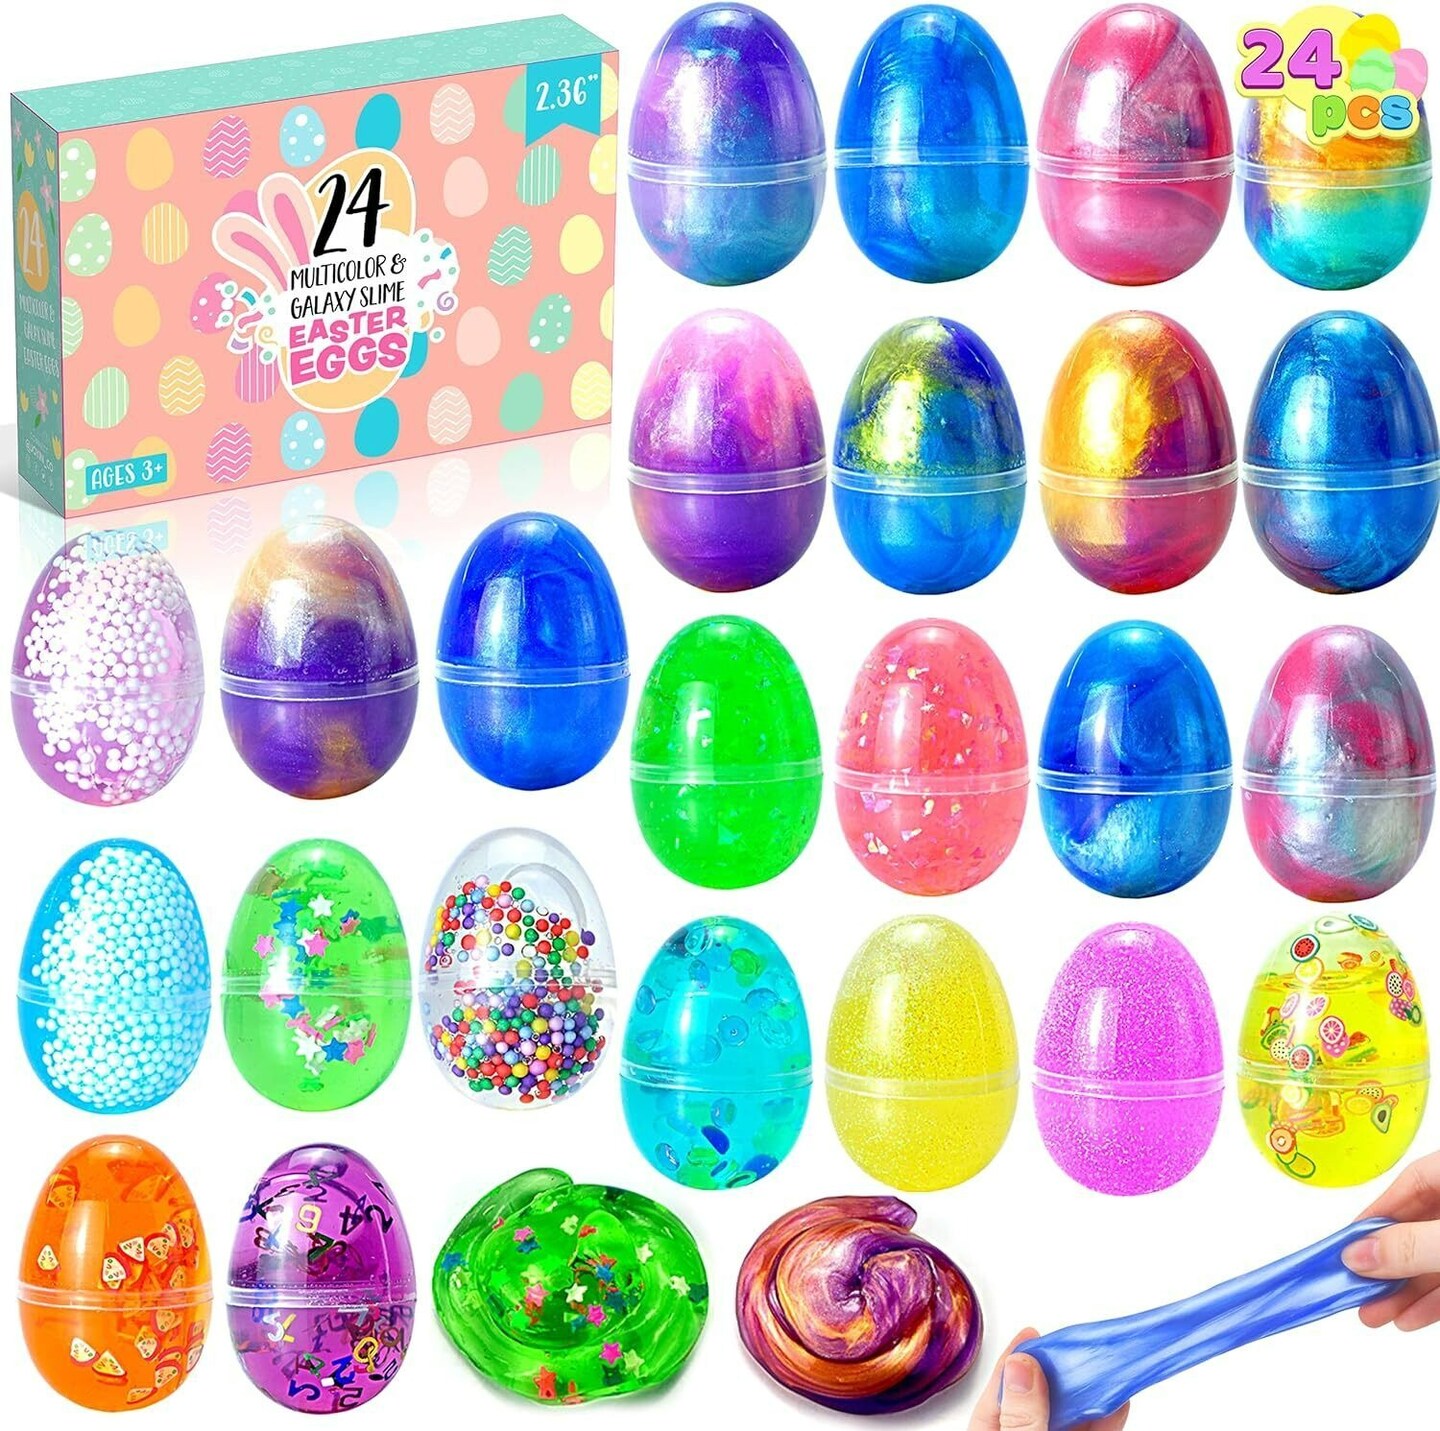 24 Pcs Easter Eggs Filled with Crystal, Galaxy, Slime and Confetti